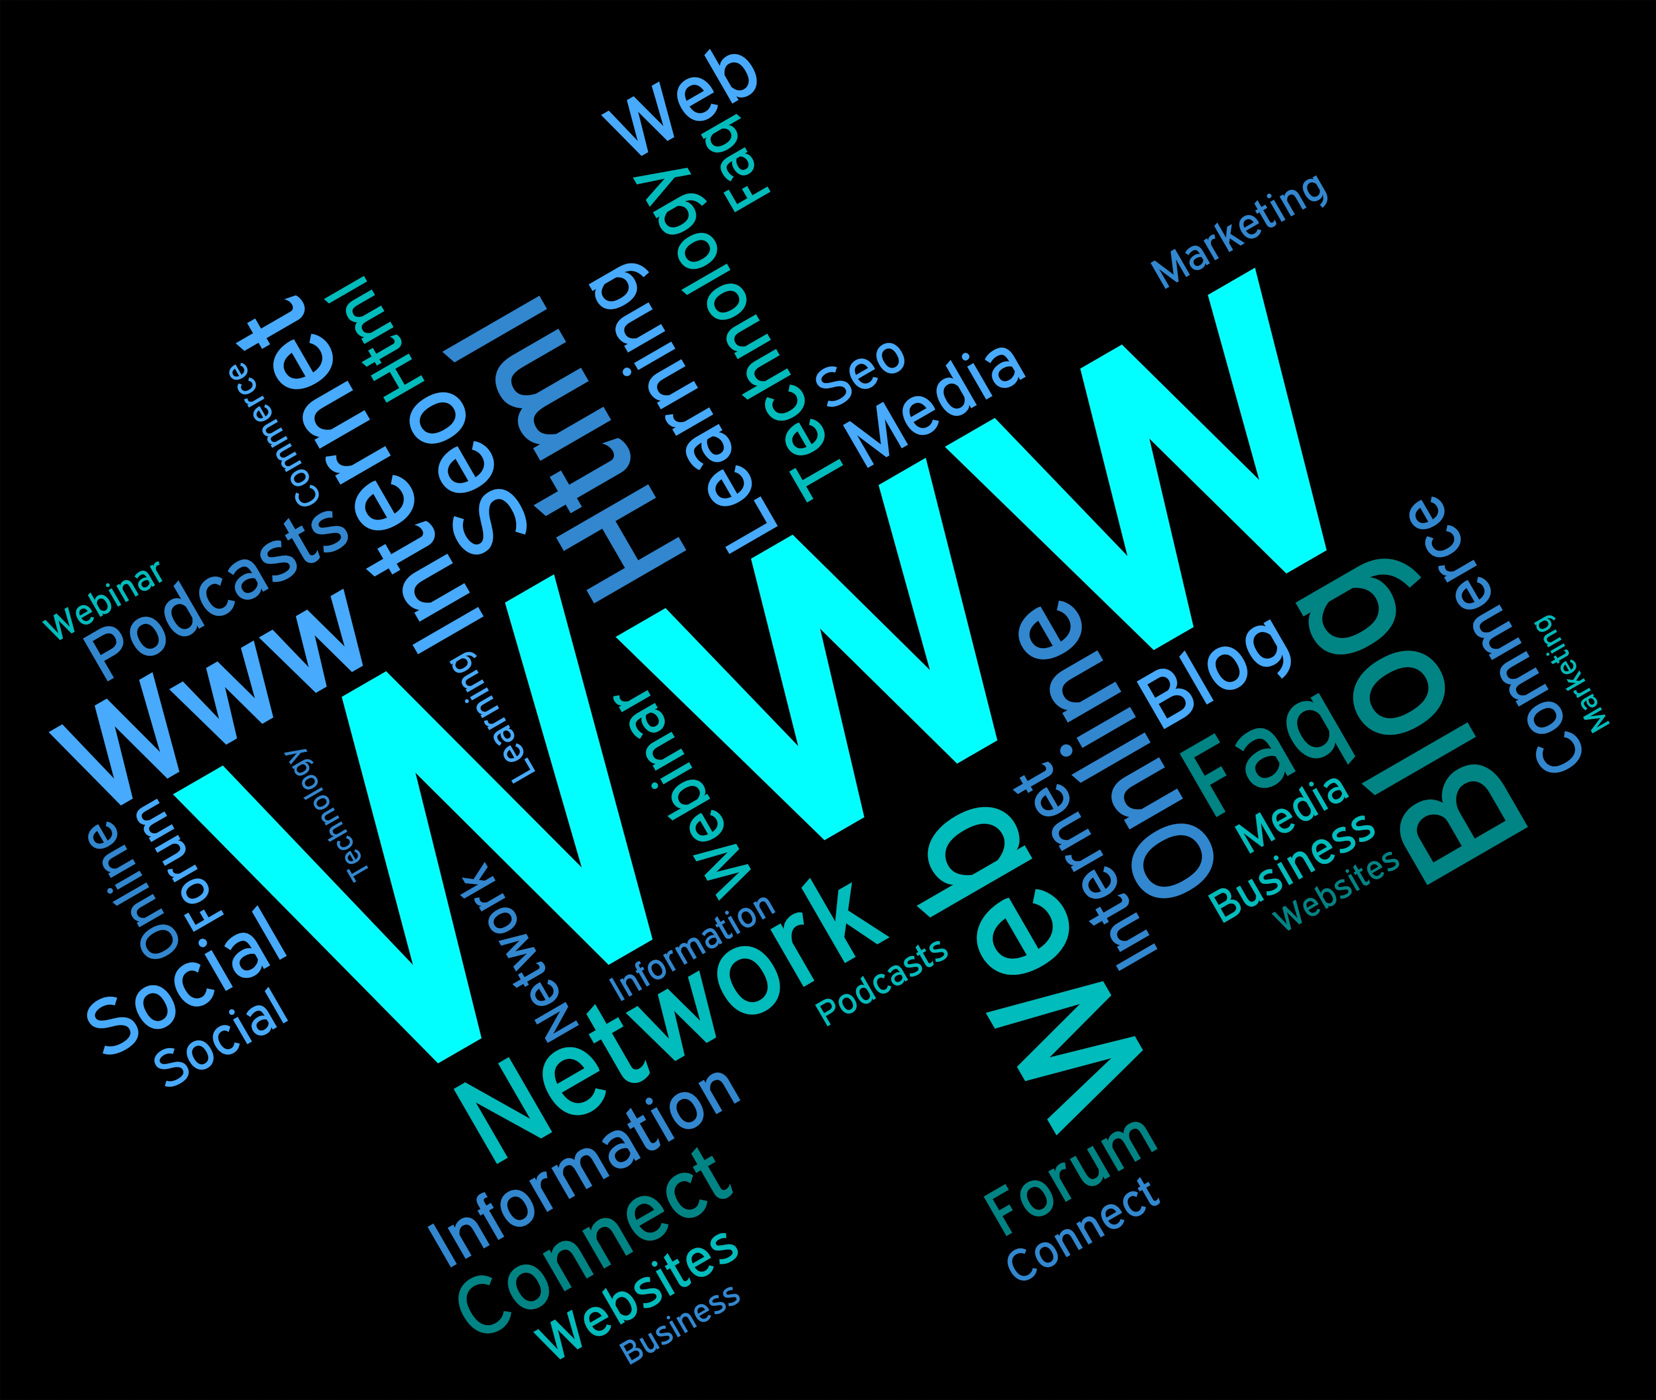 Www word means world wide web and internet photo